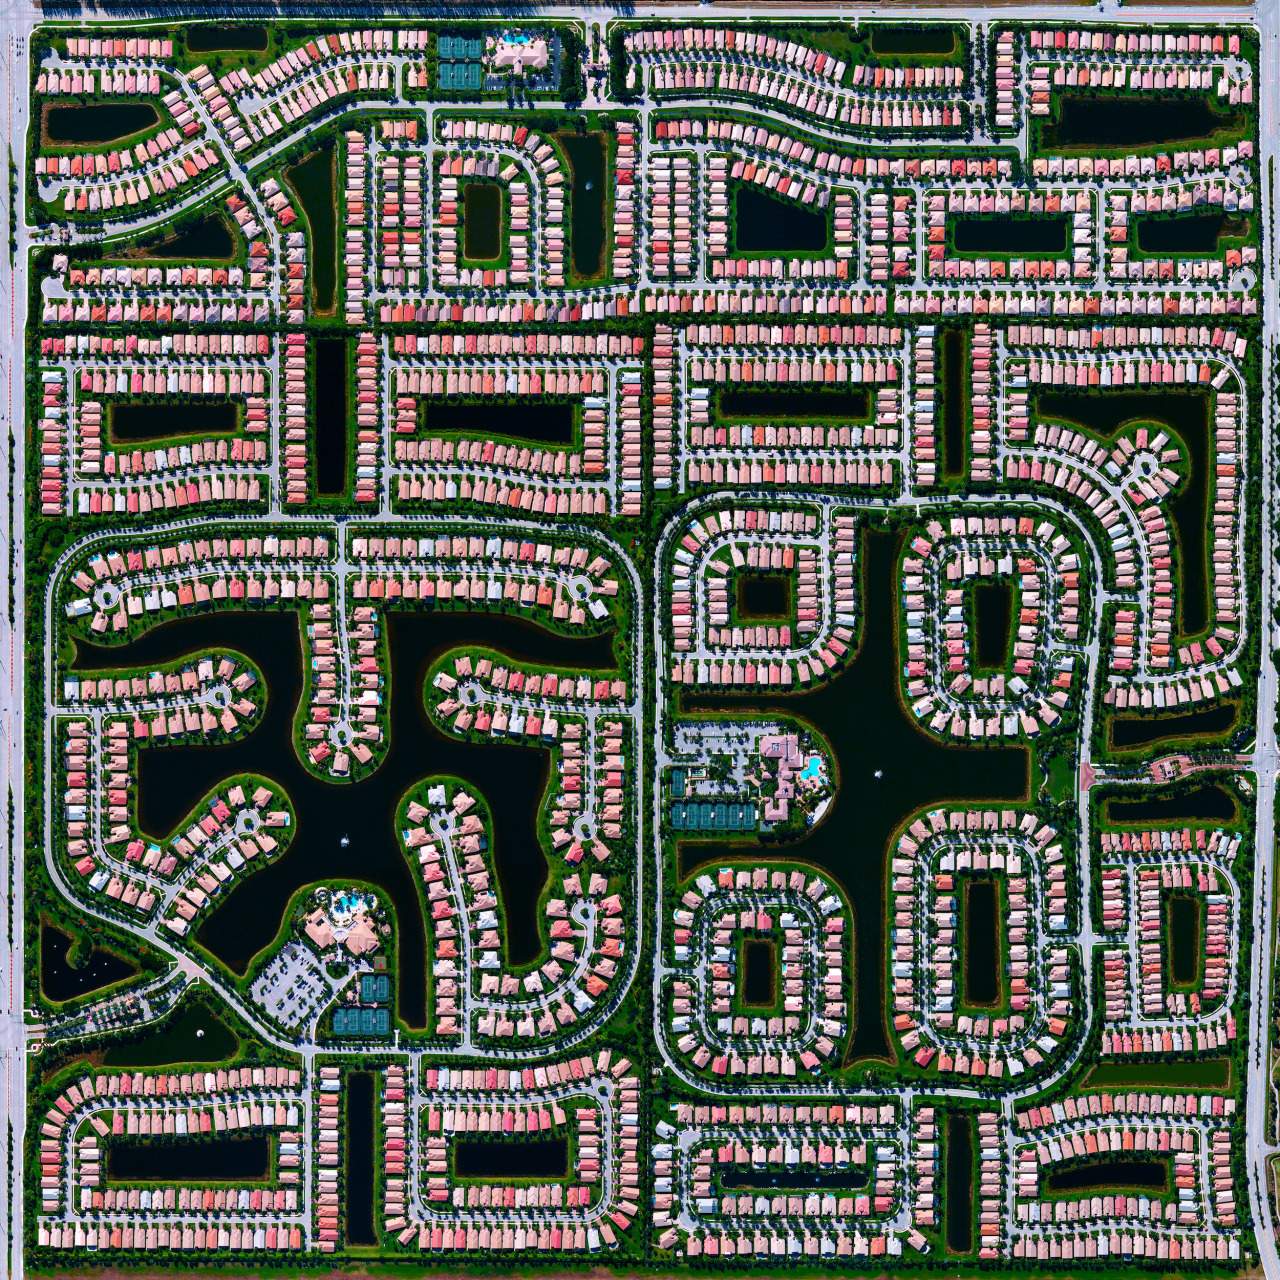 “This Overview shows residential development in Delray Beach, Florida. Because many cities in the state contain master-planned communities, often built on top of waterways in the latter half of the twentieth century, there are a number of intricate designs that are visible from above. According to the 2010 Census, 20.4% of the city’s homes were vacant.”